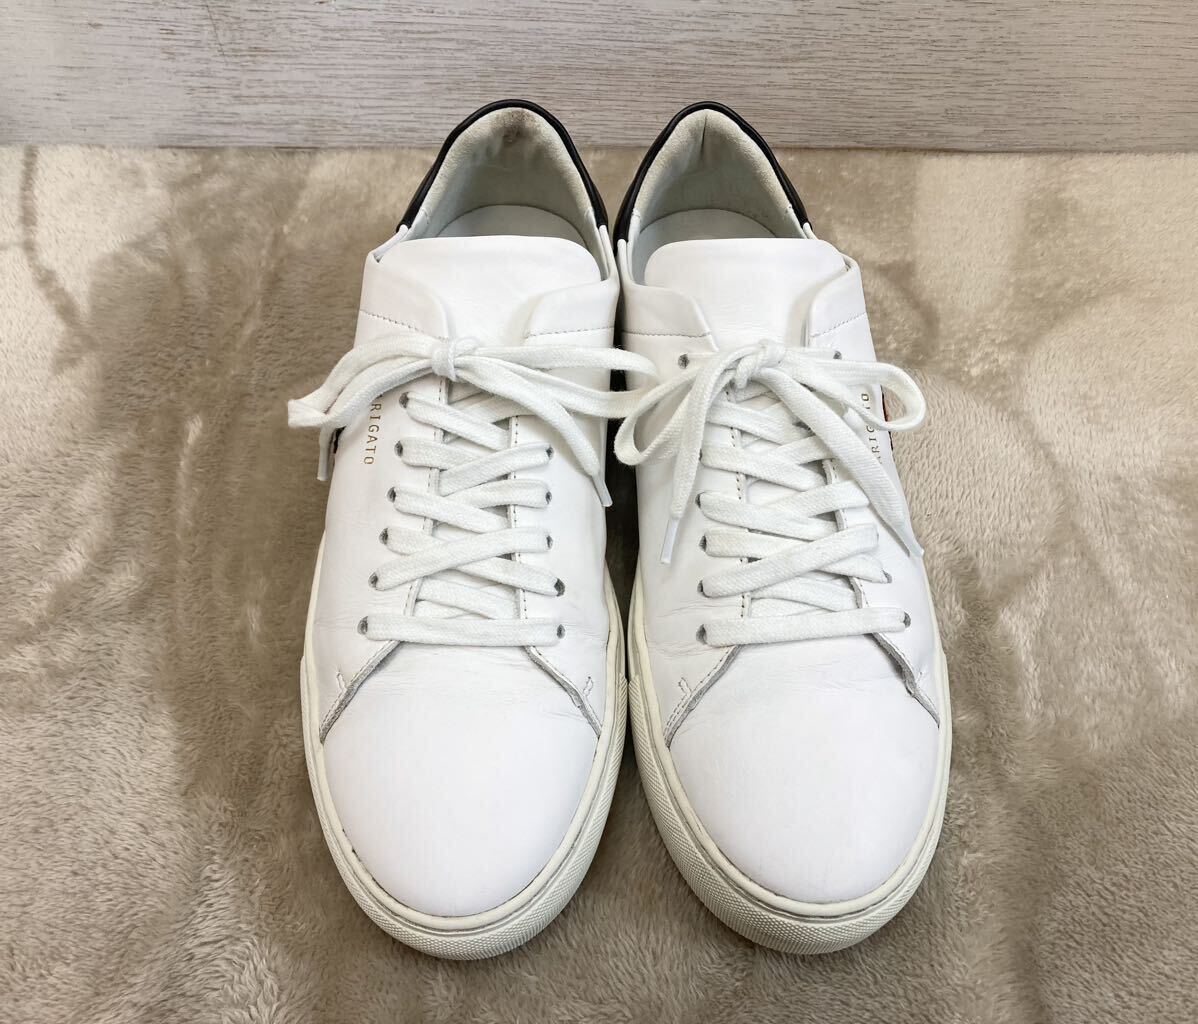  beautiful goods!Y38,990 Portugal made [AXEL ARIGATO×Keith Haring] accelerator have gato× Keith he ring natural leather leather sneakers white /42(27.0)